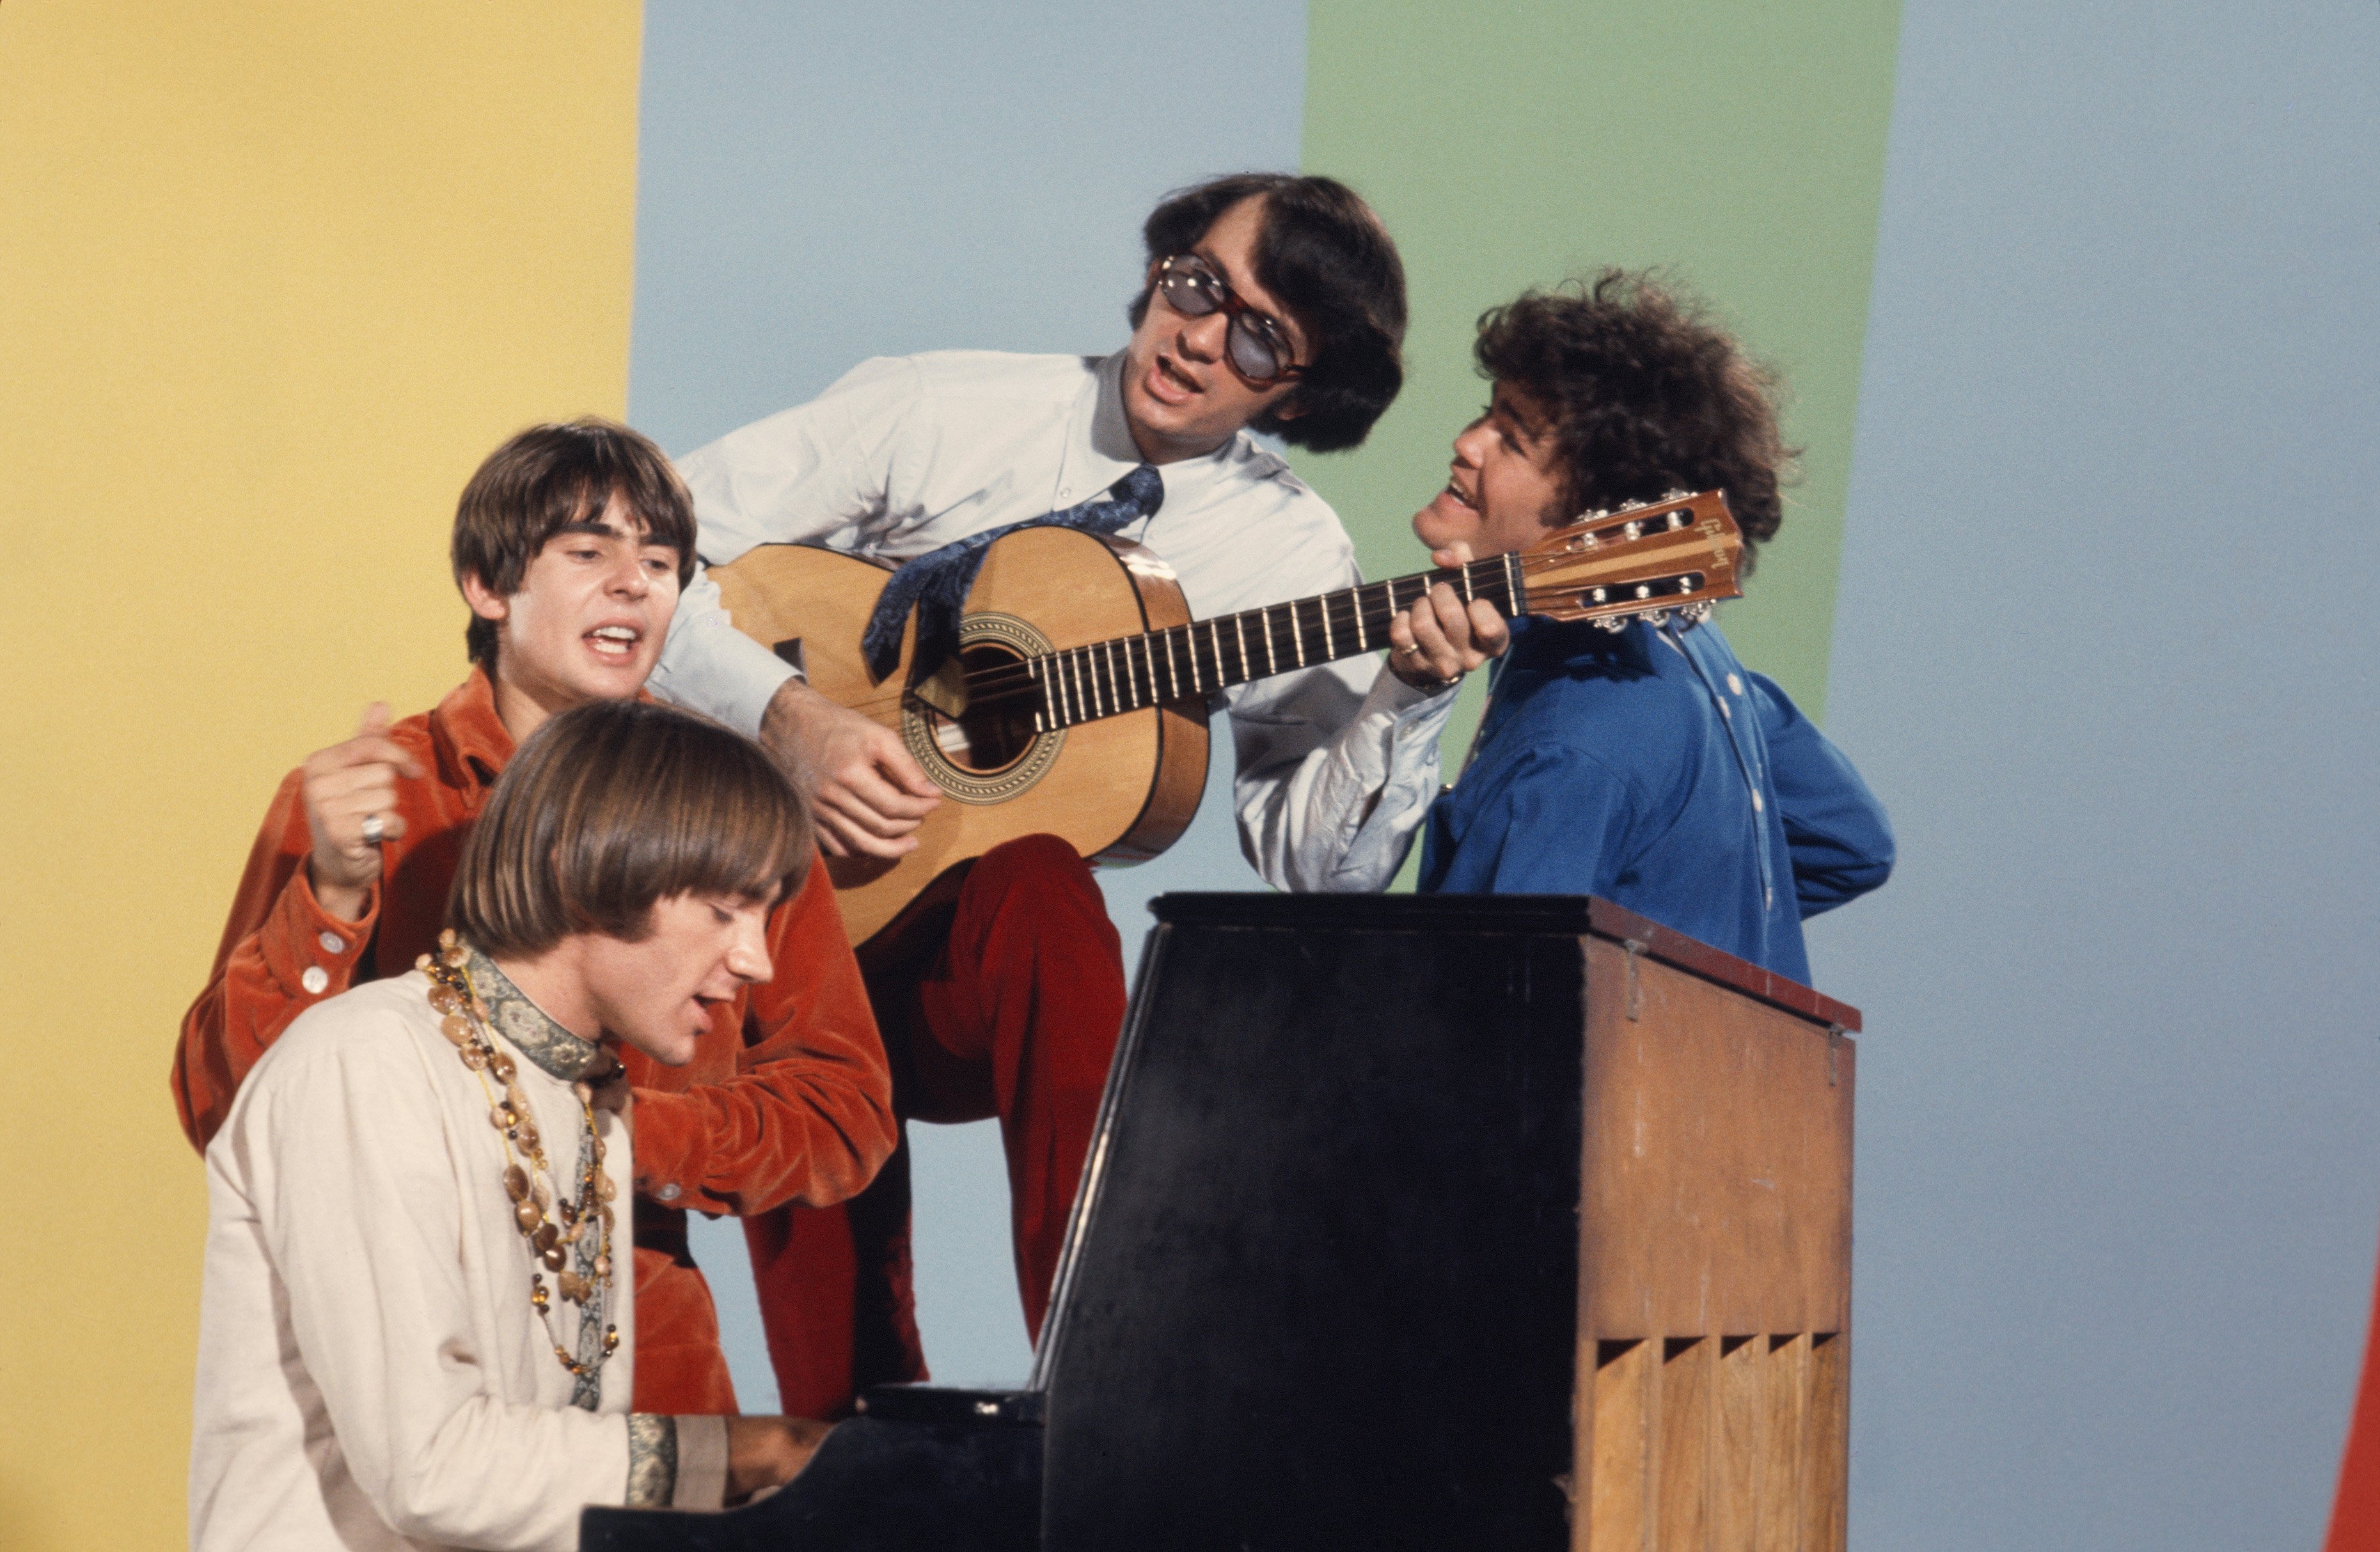 The Monkees' Peter Tork, Davy Jones, Mike Nesmith, and Micky Dolenz near a piano